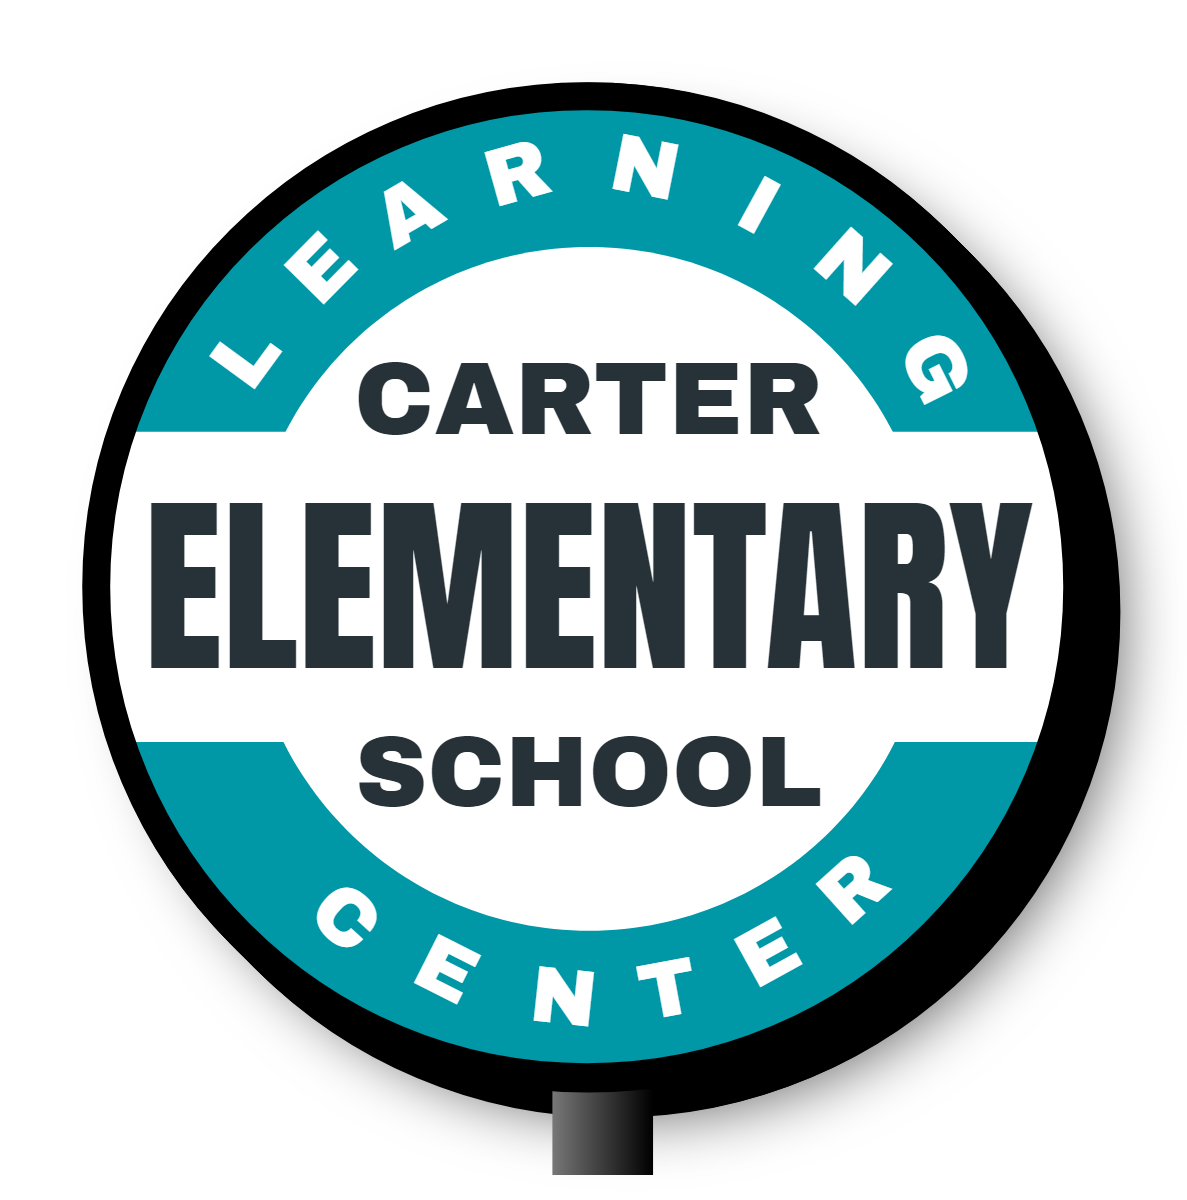 Carter Elementary School Double Faced Lit Shaped Cabinet Sign